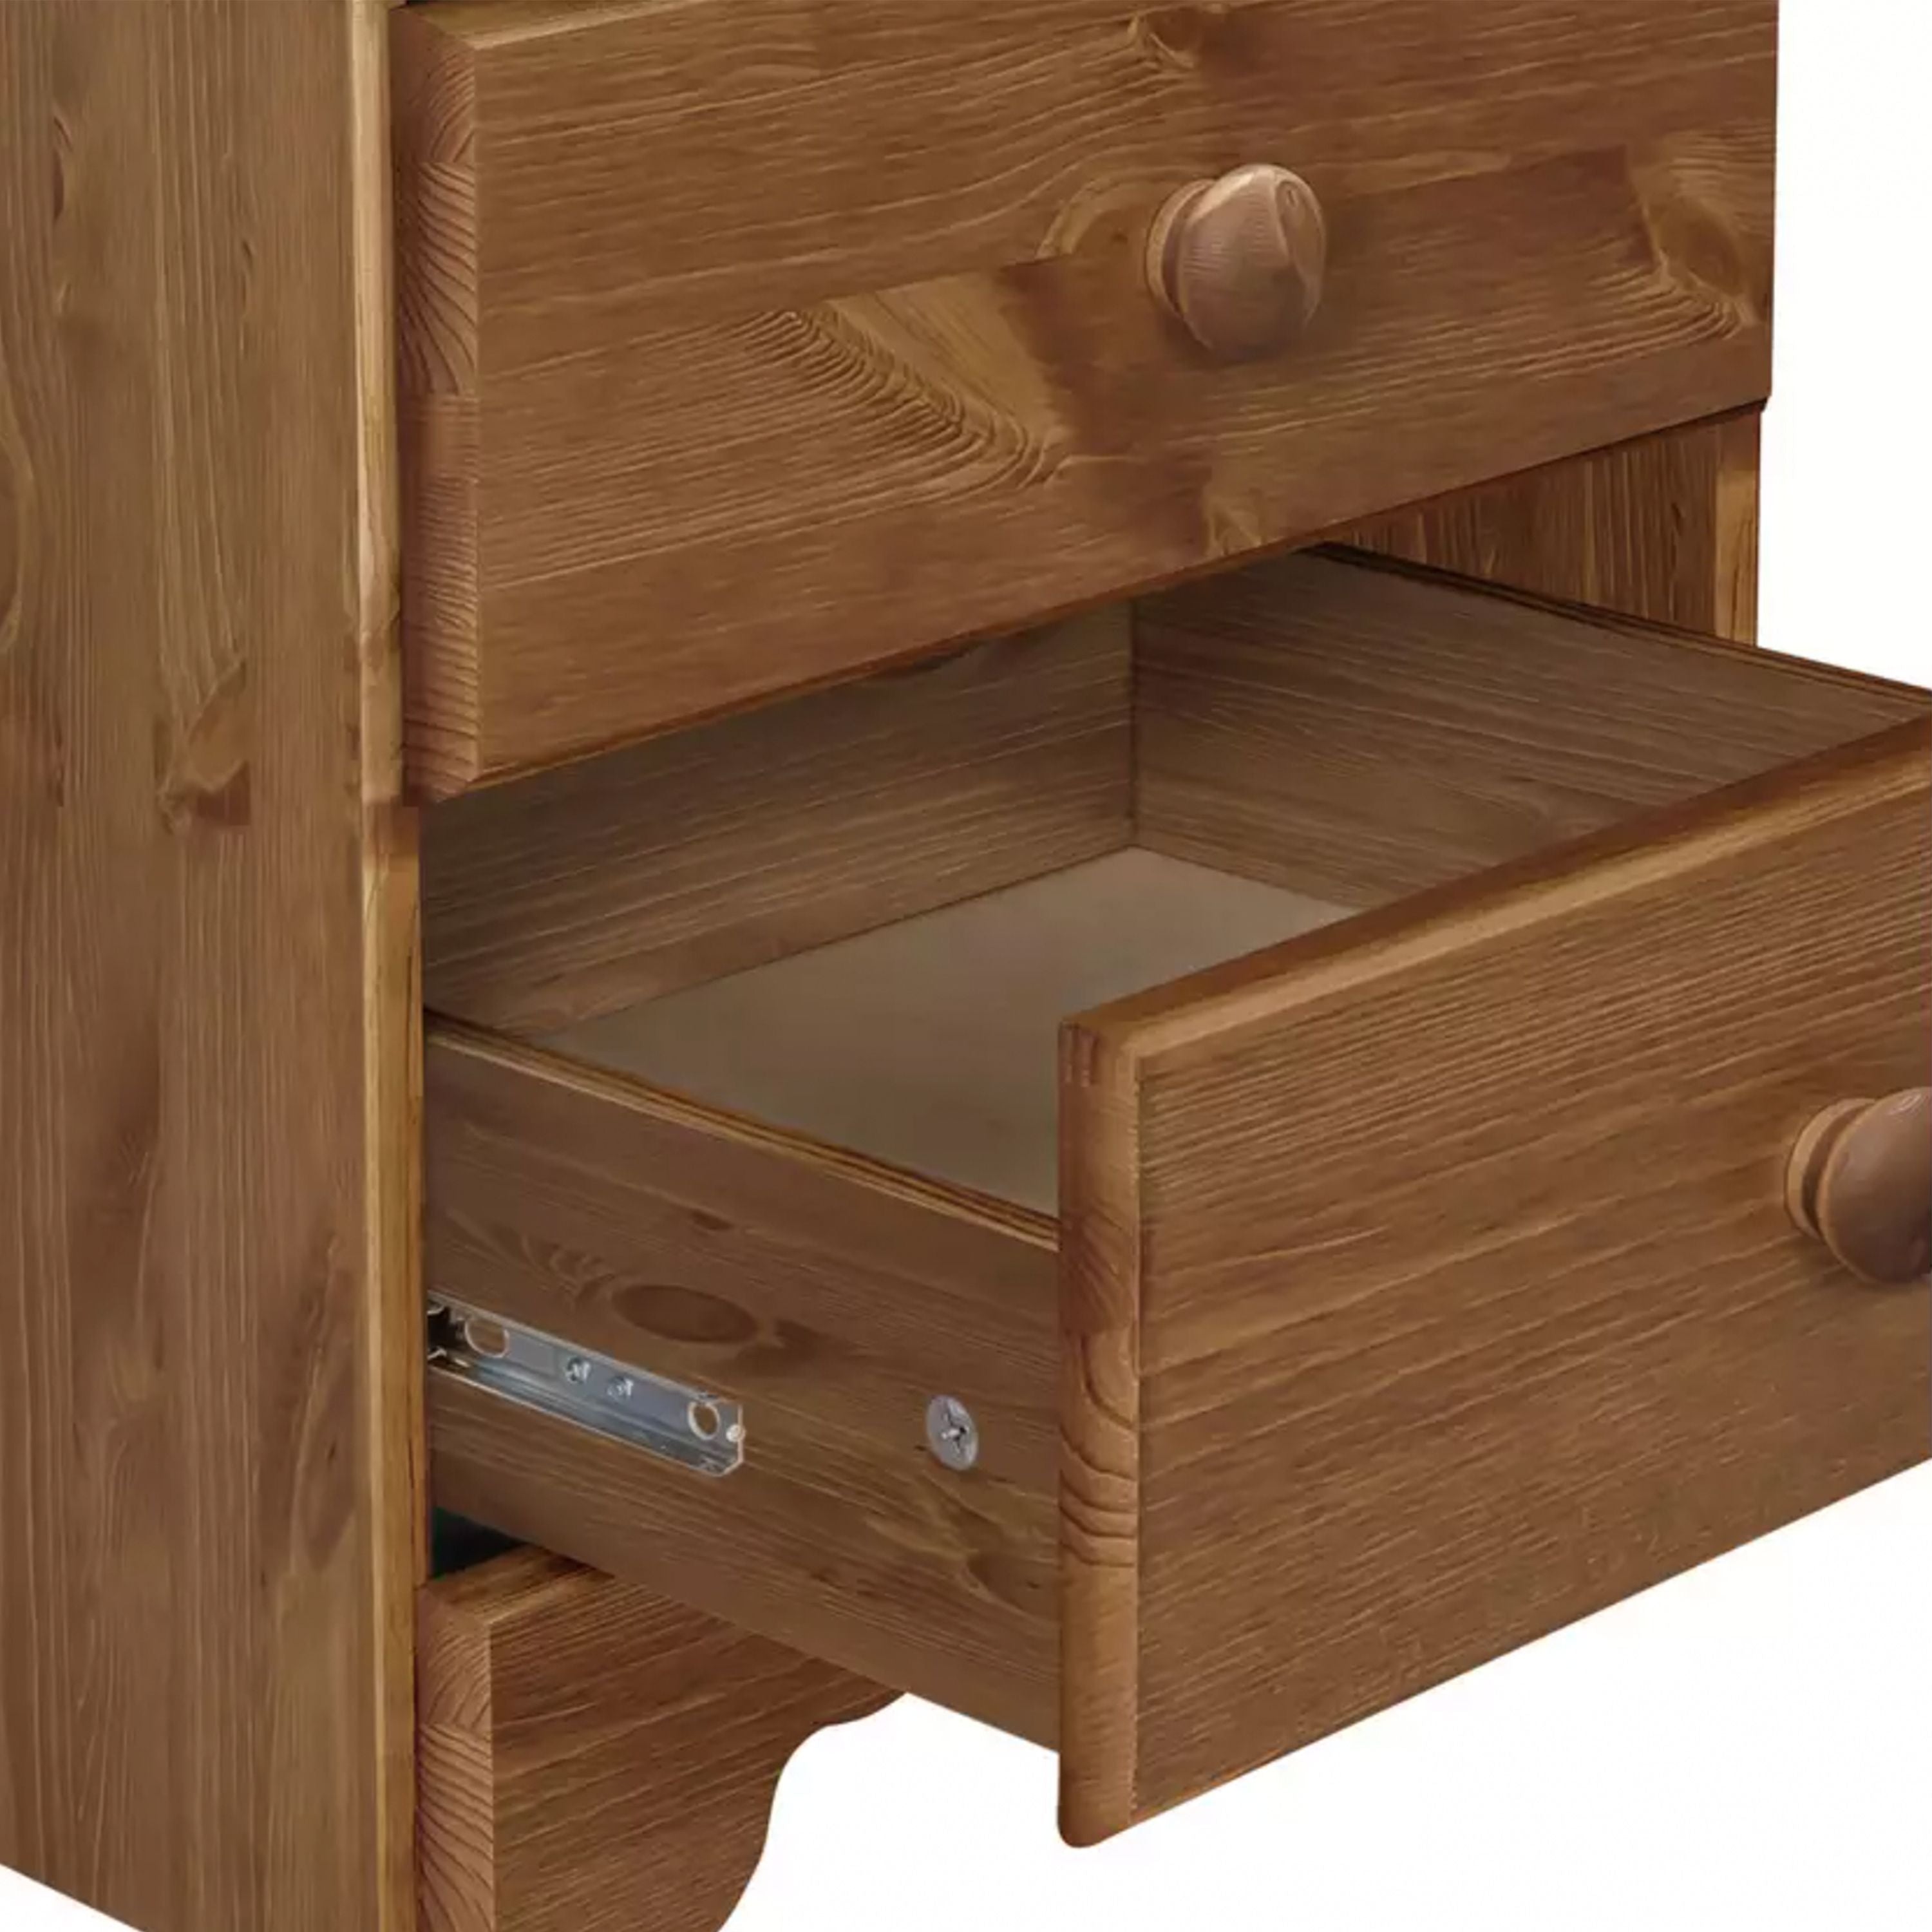 Nordic Bedside Table 3 Drawers in Cherry Pine